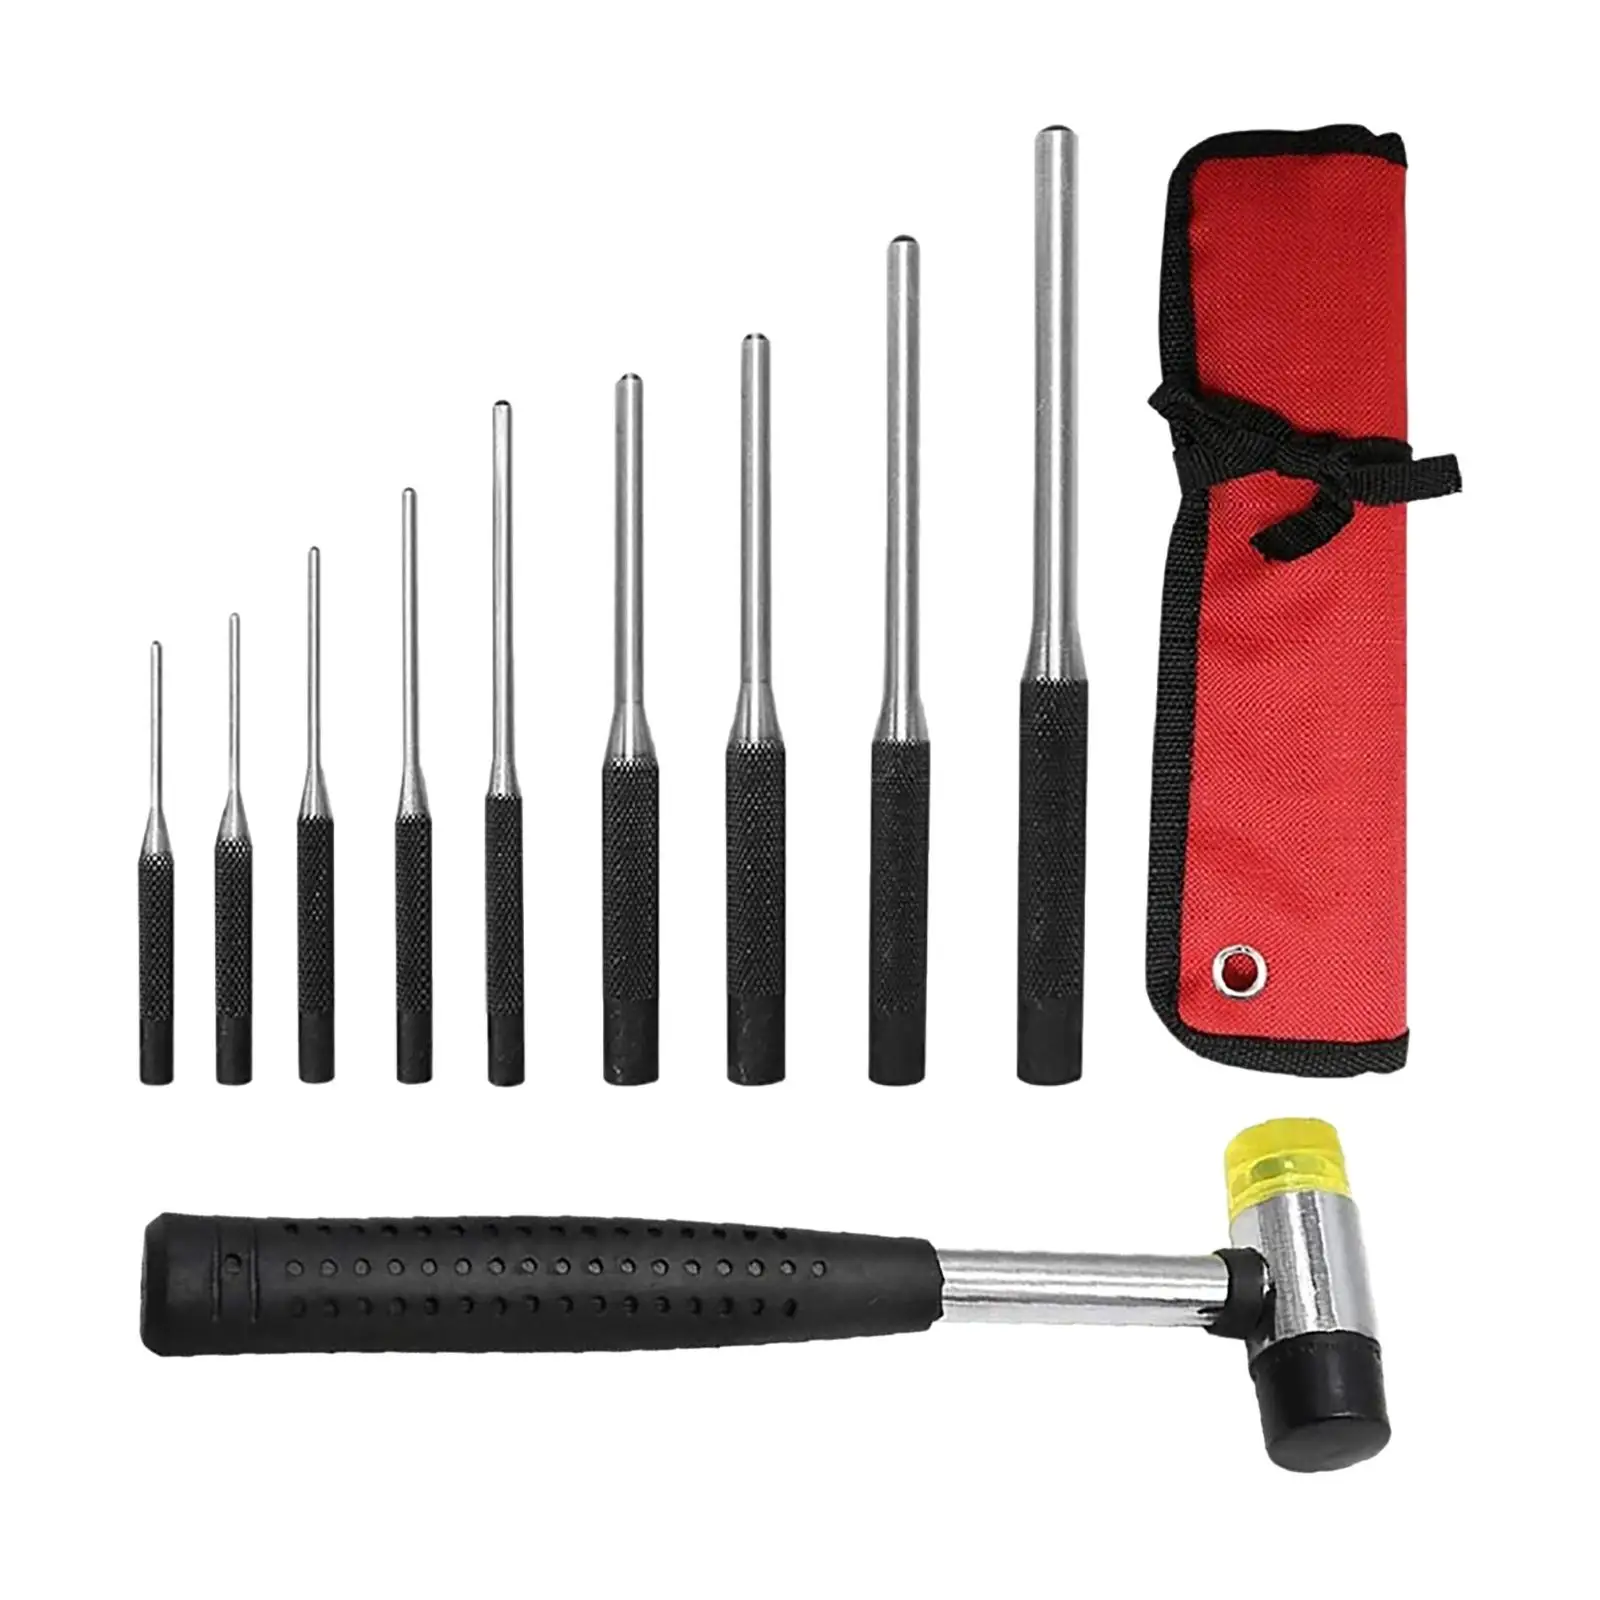 Roll Pin Punch Set with Storage Pouch, 9Pcs Steel Removal Tool Kit with Carrying Bag for Jewelers, Watch Repairers, Work, Retail